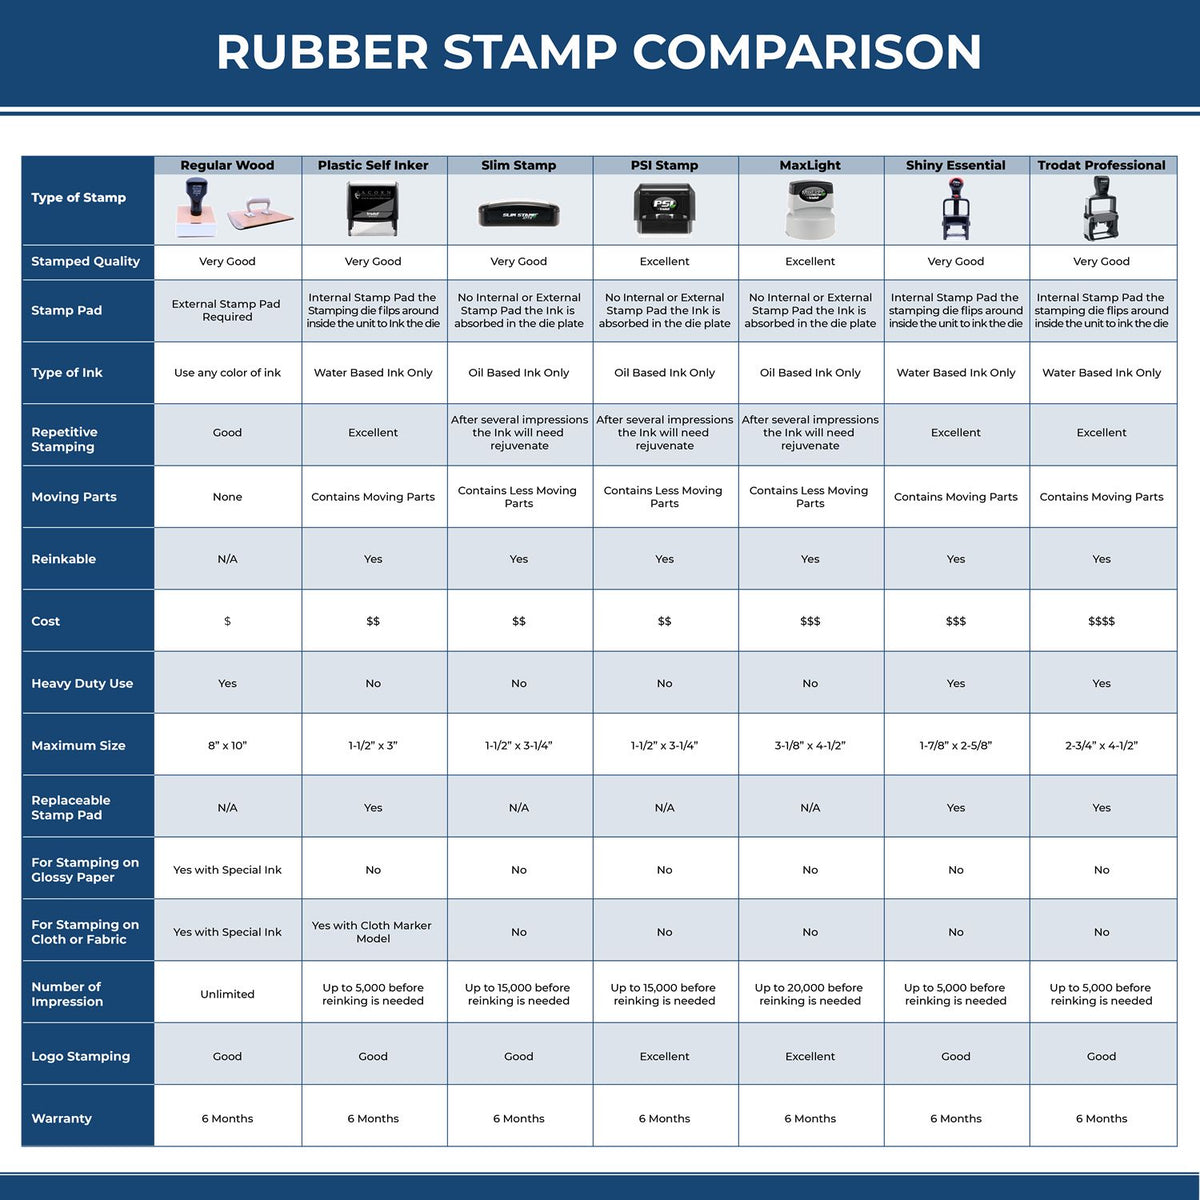 A comparison chart for the different types of mount models available for the PSI Minnesota Notary Stamp.